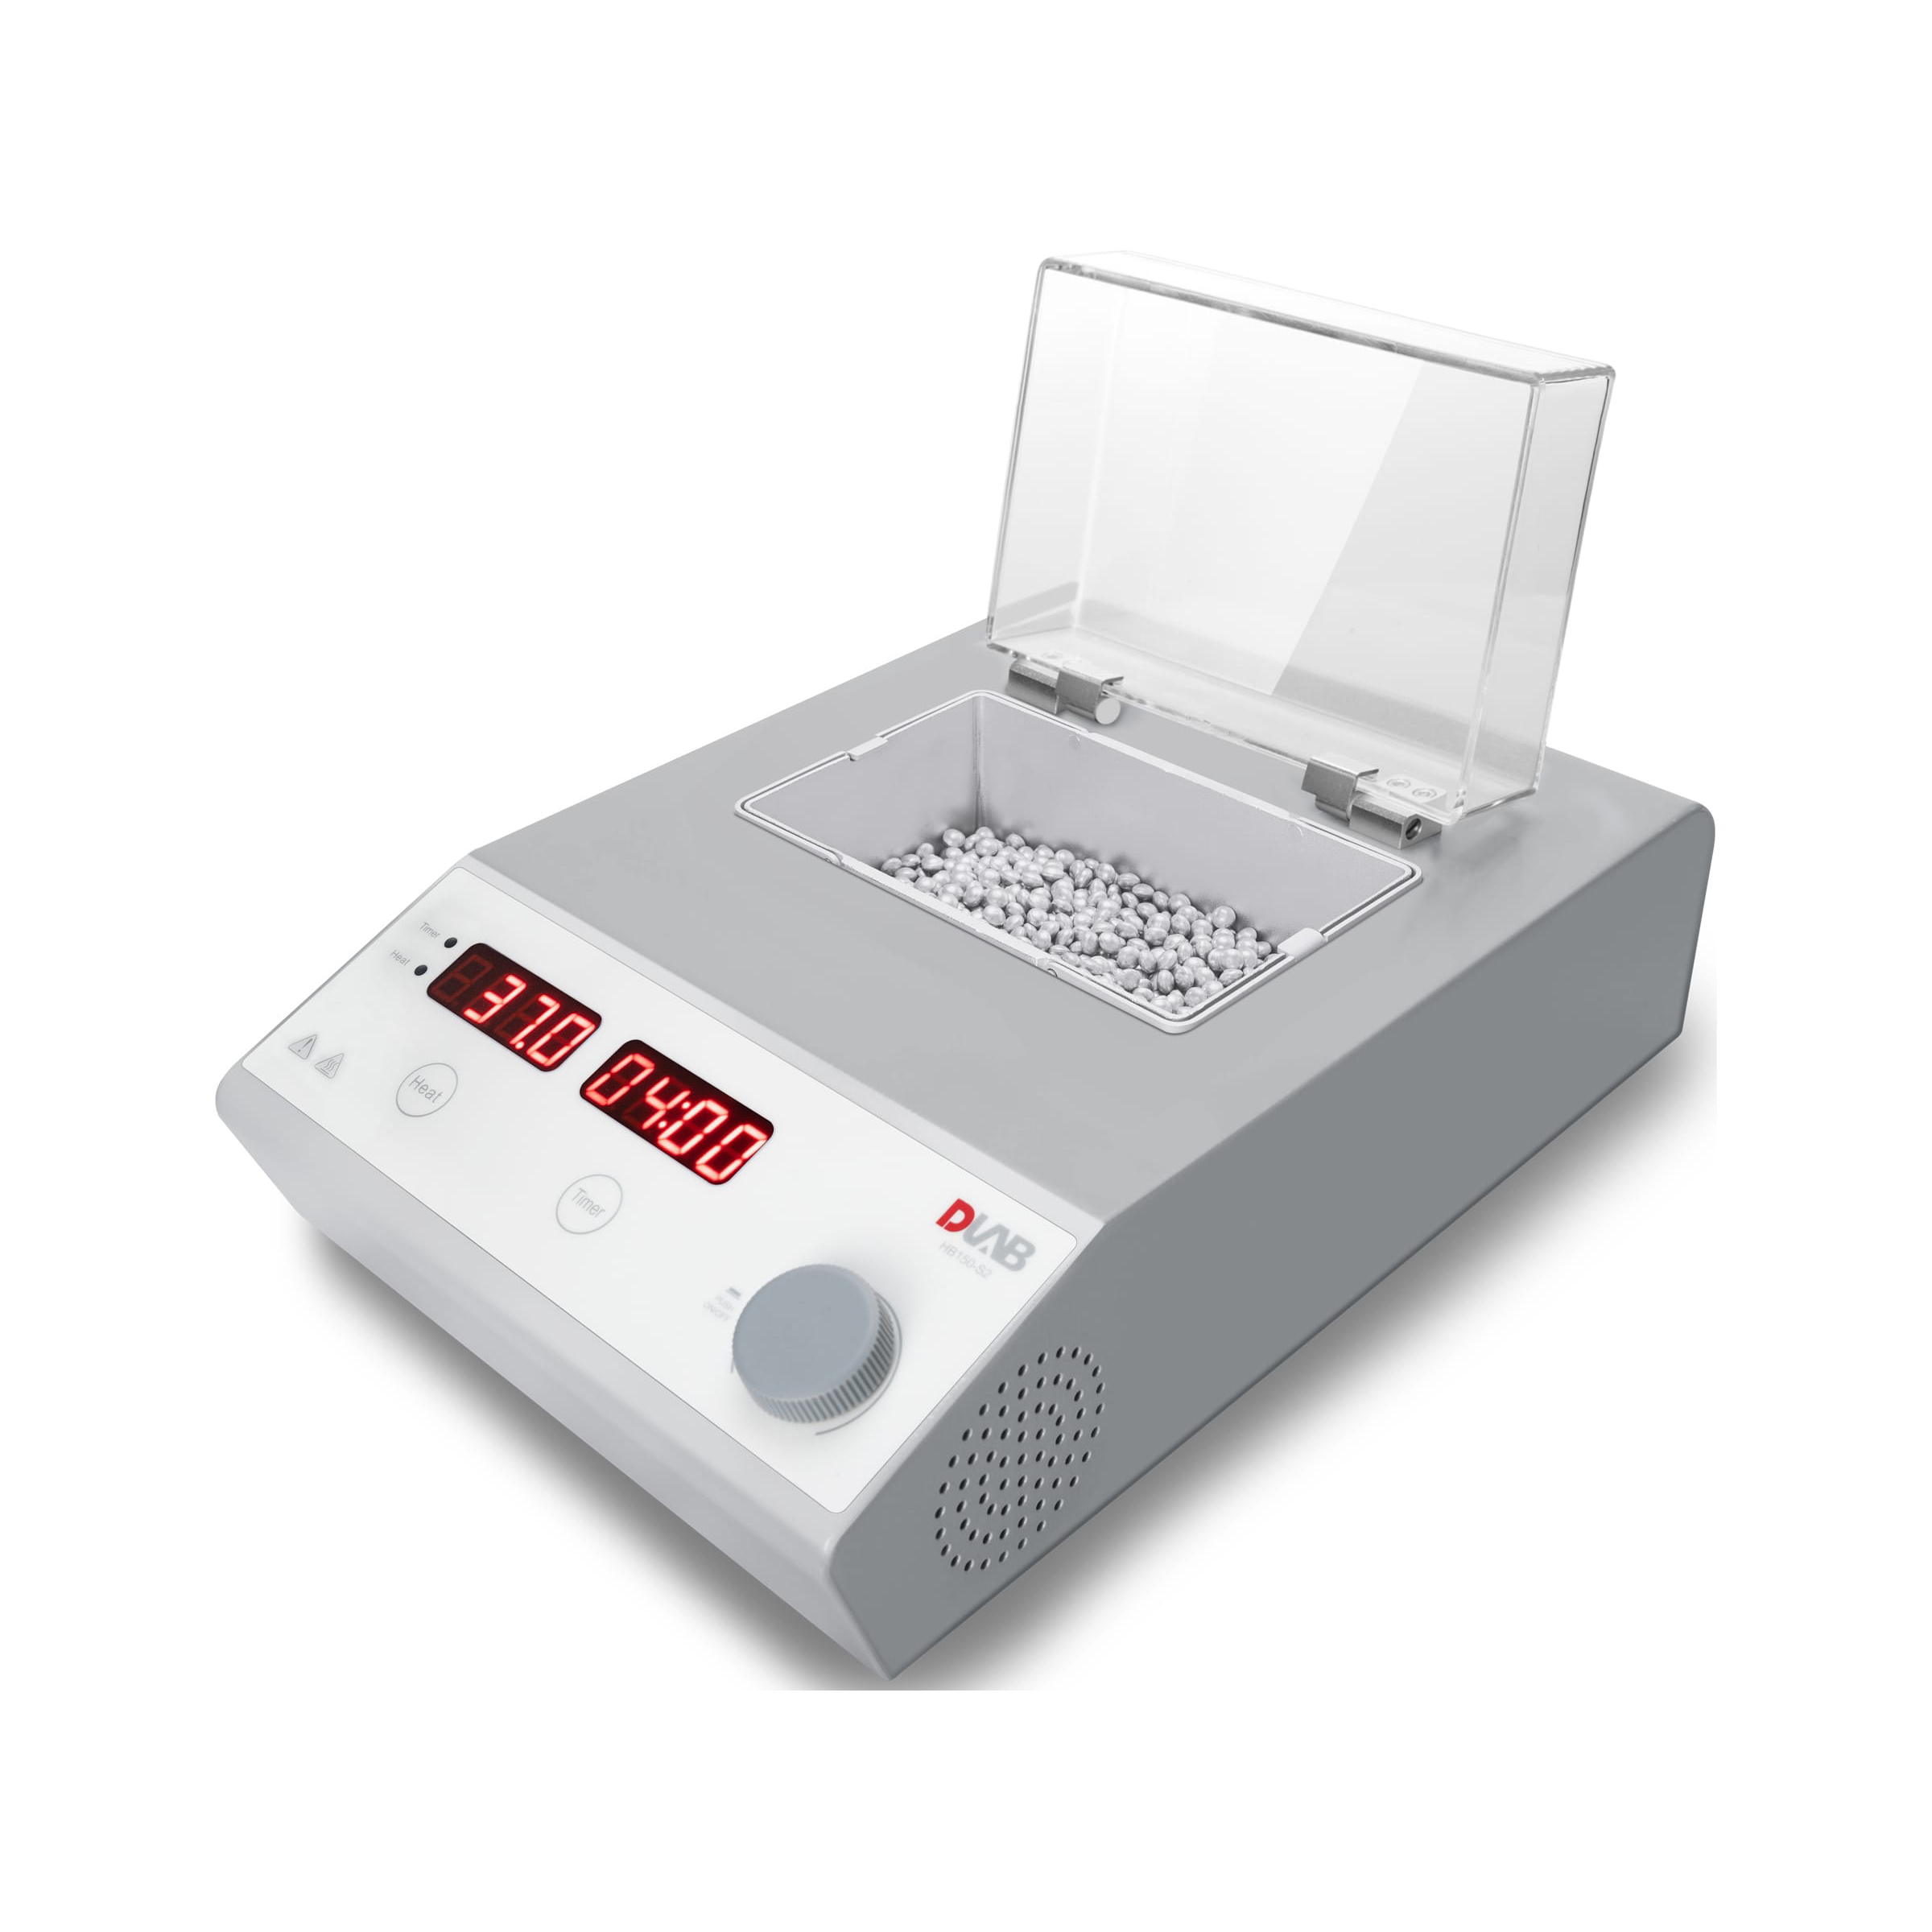 DLAB Thermo Controls HB150-S2